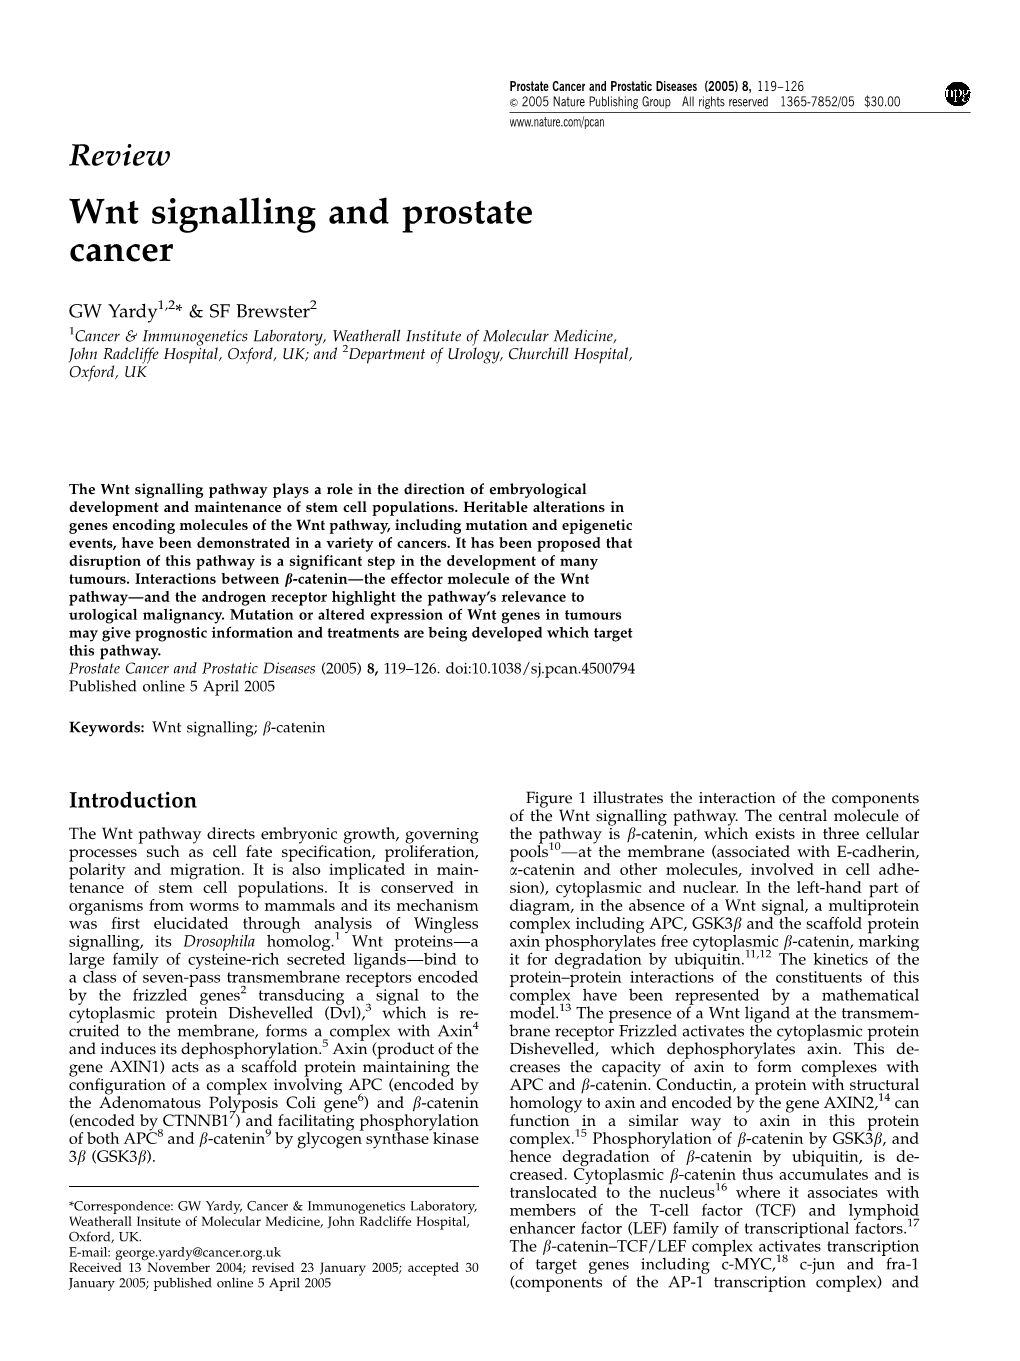 Wnt Signalling and Prostate Cancer